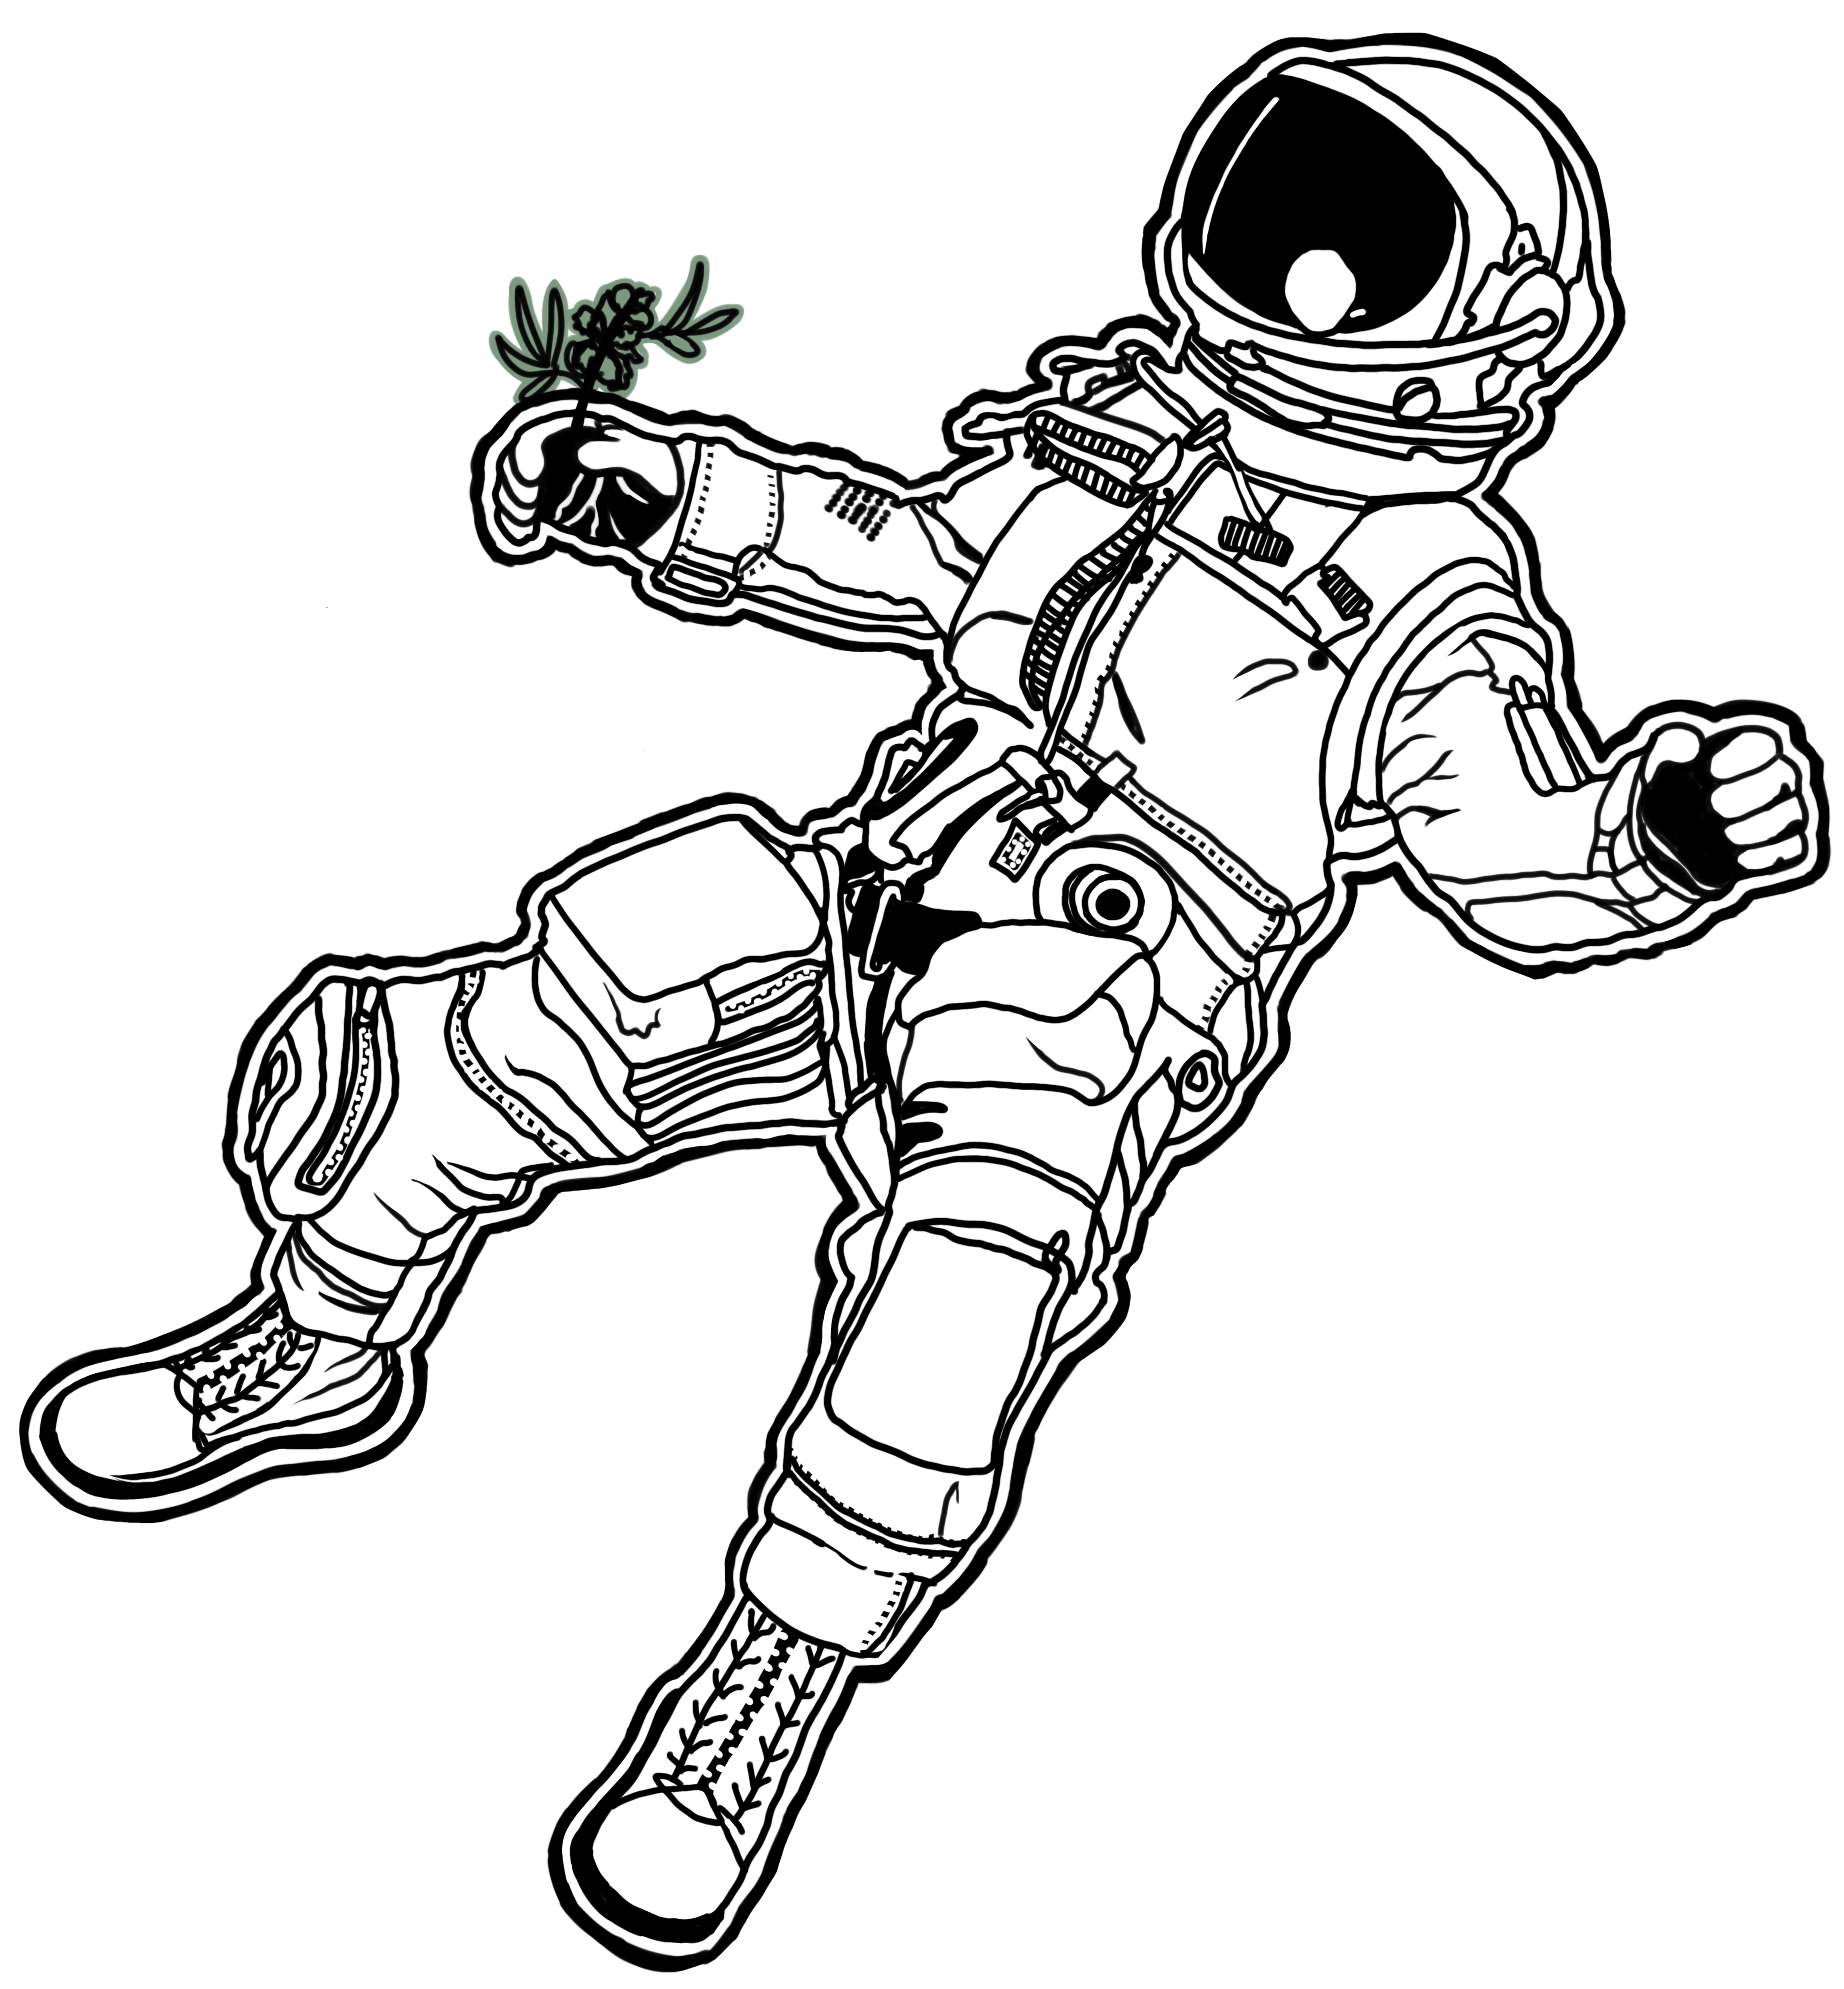 Floating_astronaut_.png